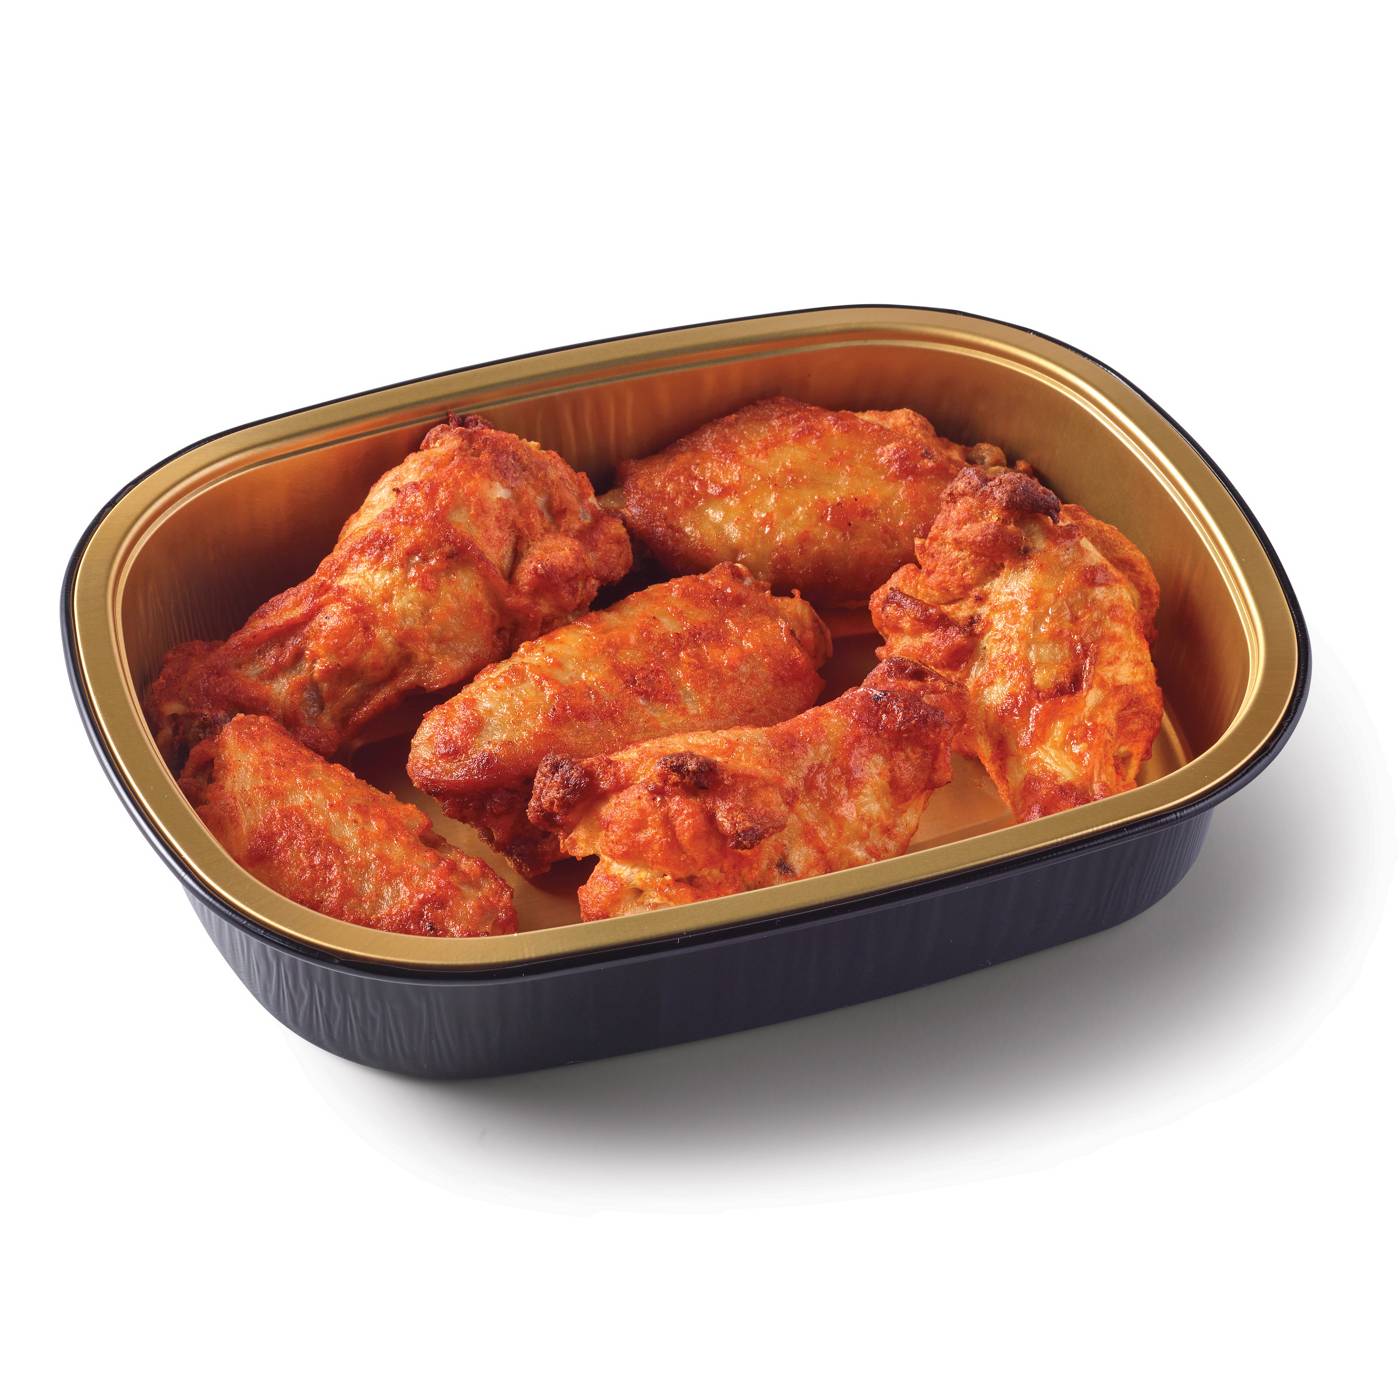 Meal Simple by H-E-B Seasoned Chicken Wings - Buffalo Style; image 4 of 4